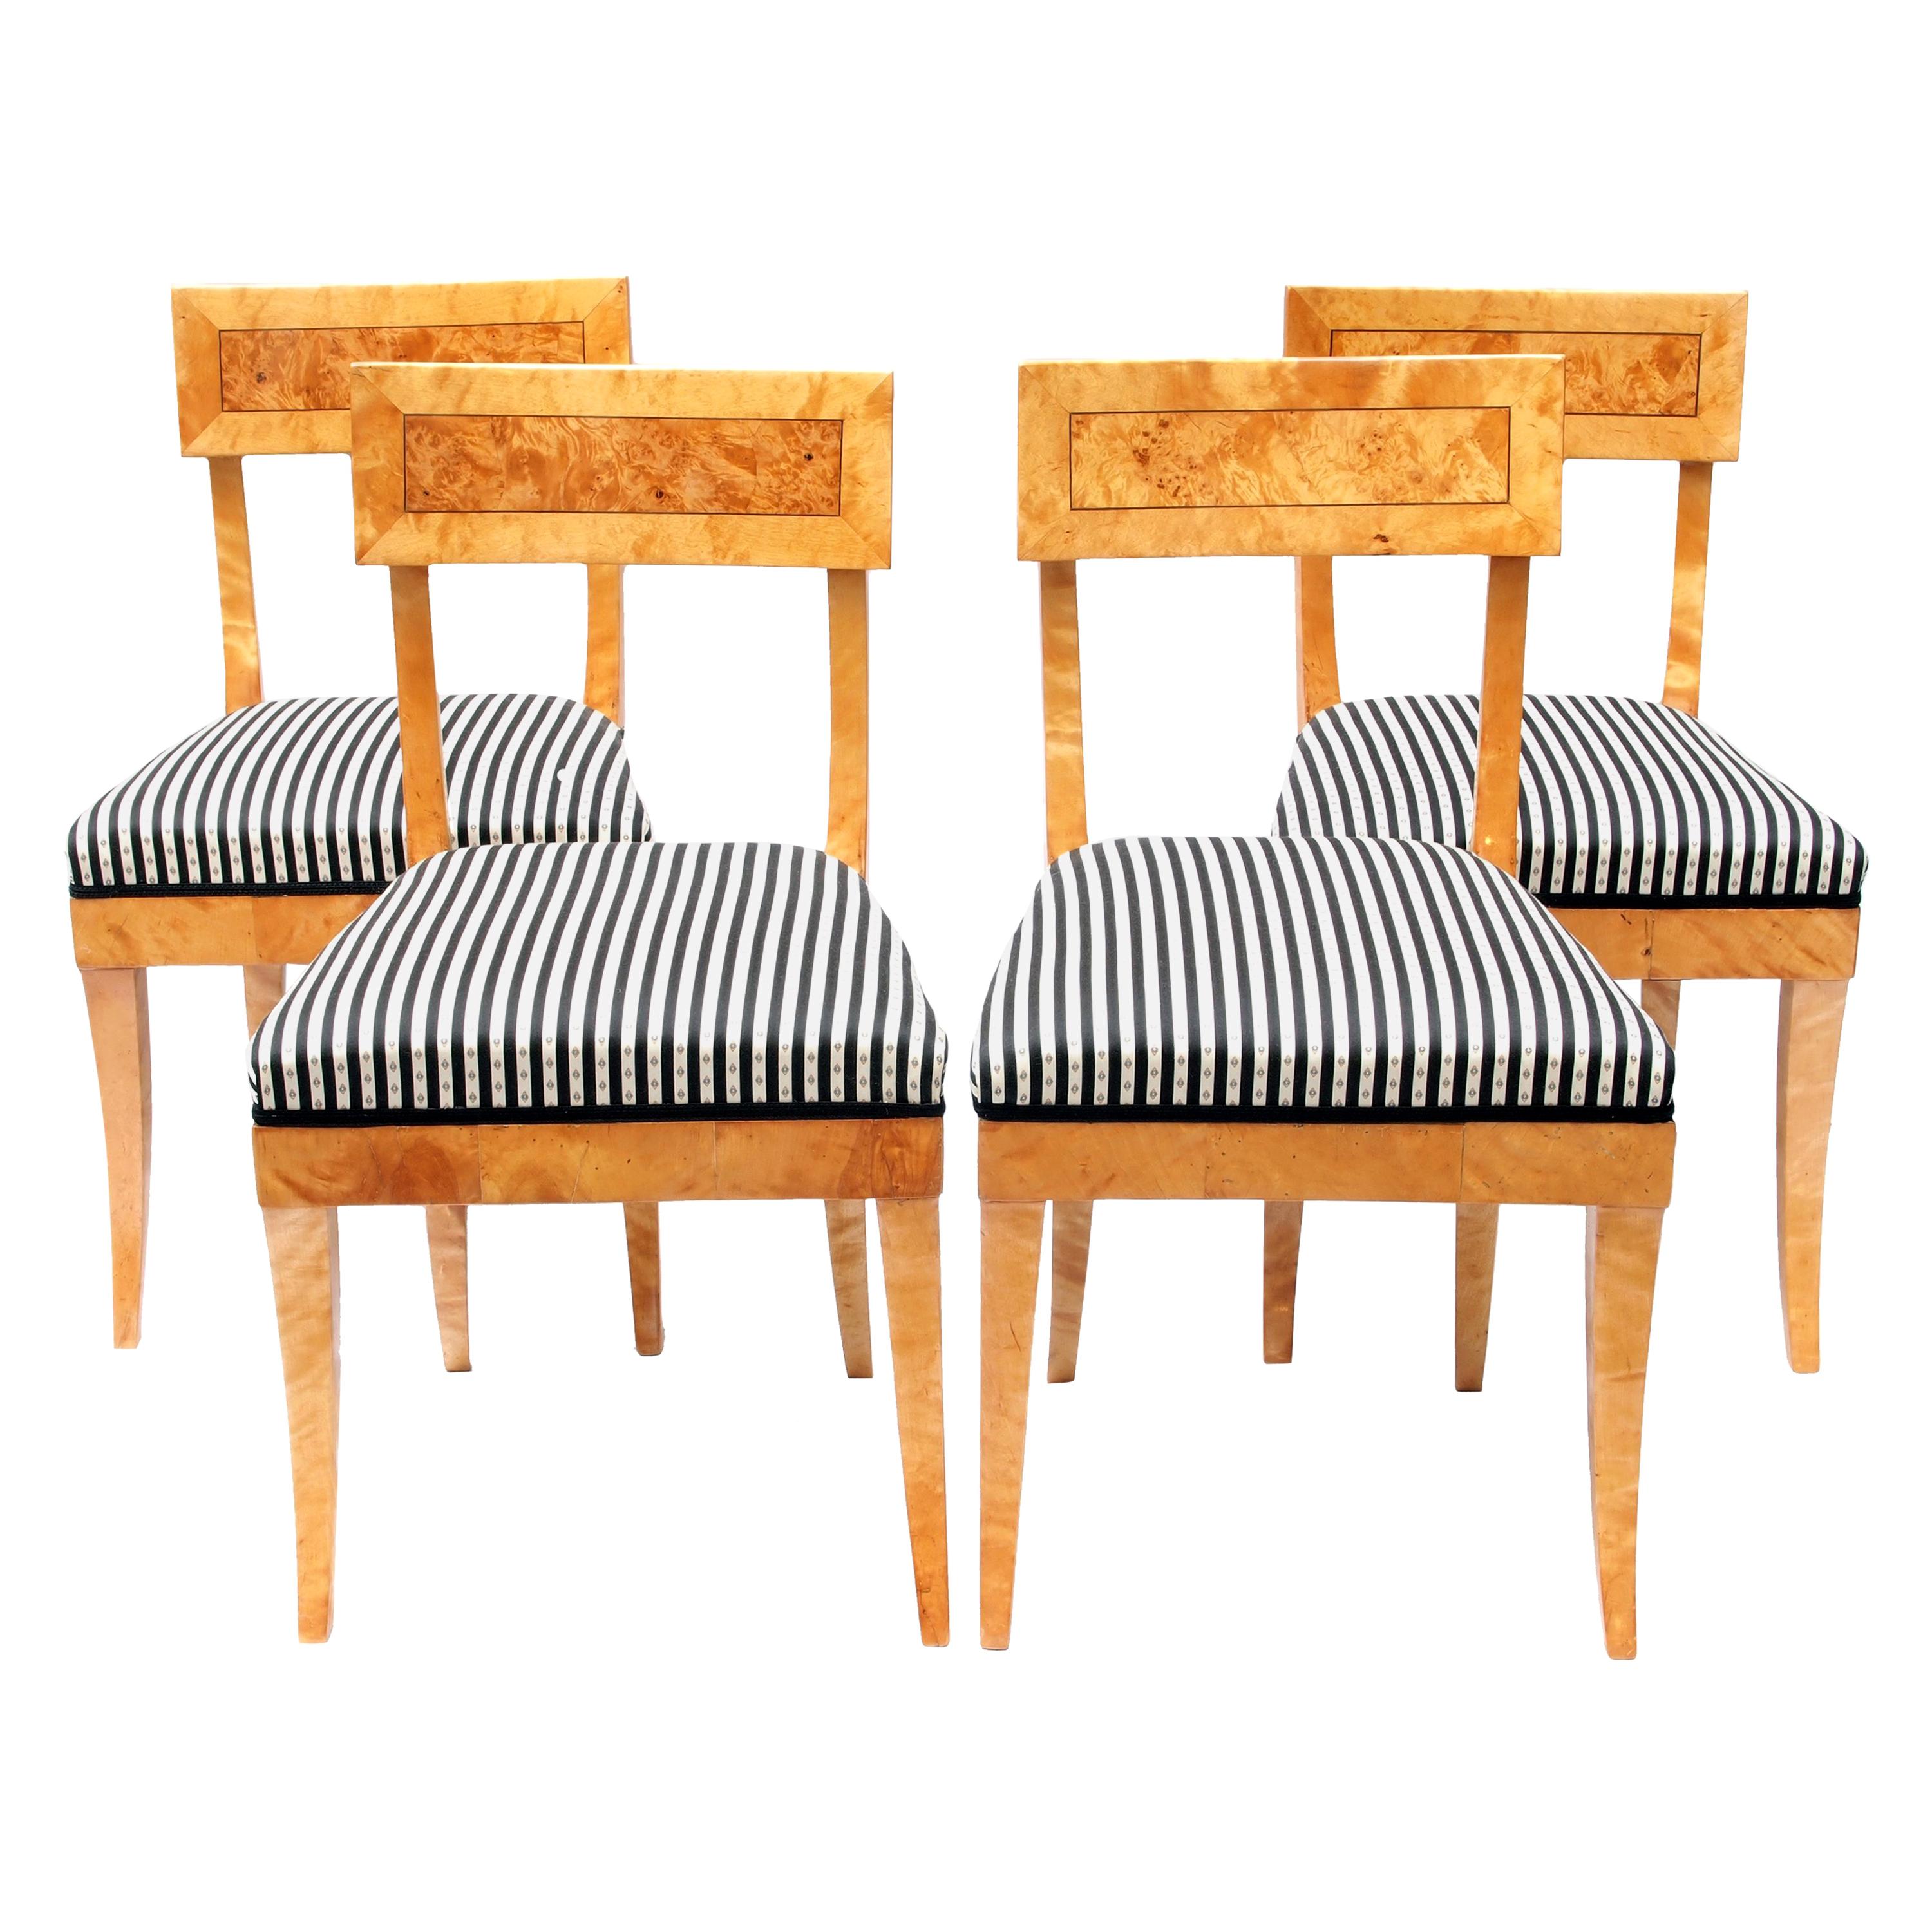 Early 19th Century Set of Four Biedermeier Birch Wood Chairs from Germany